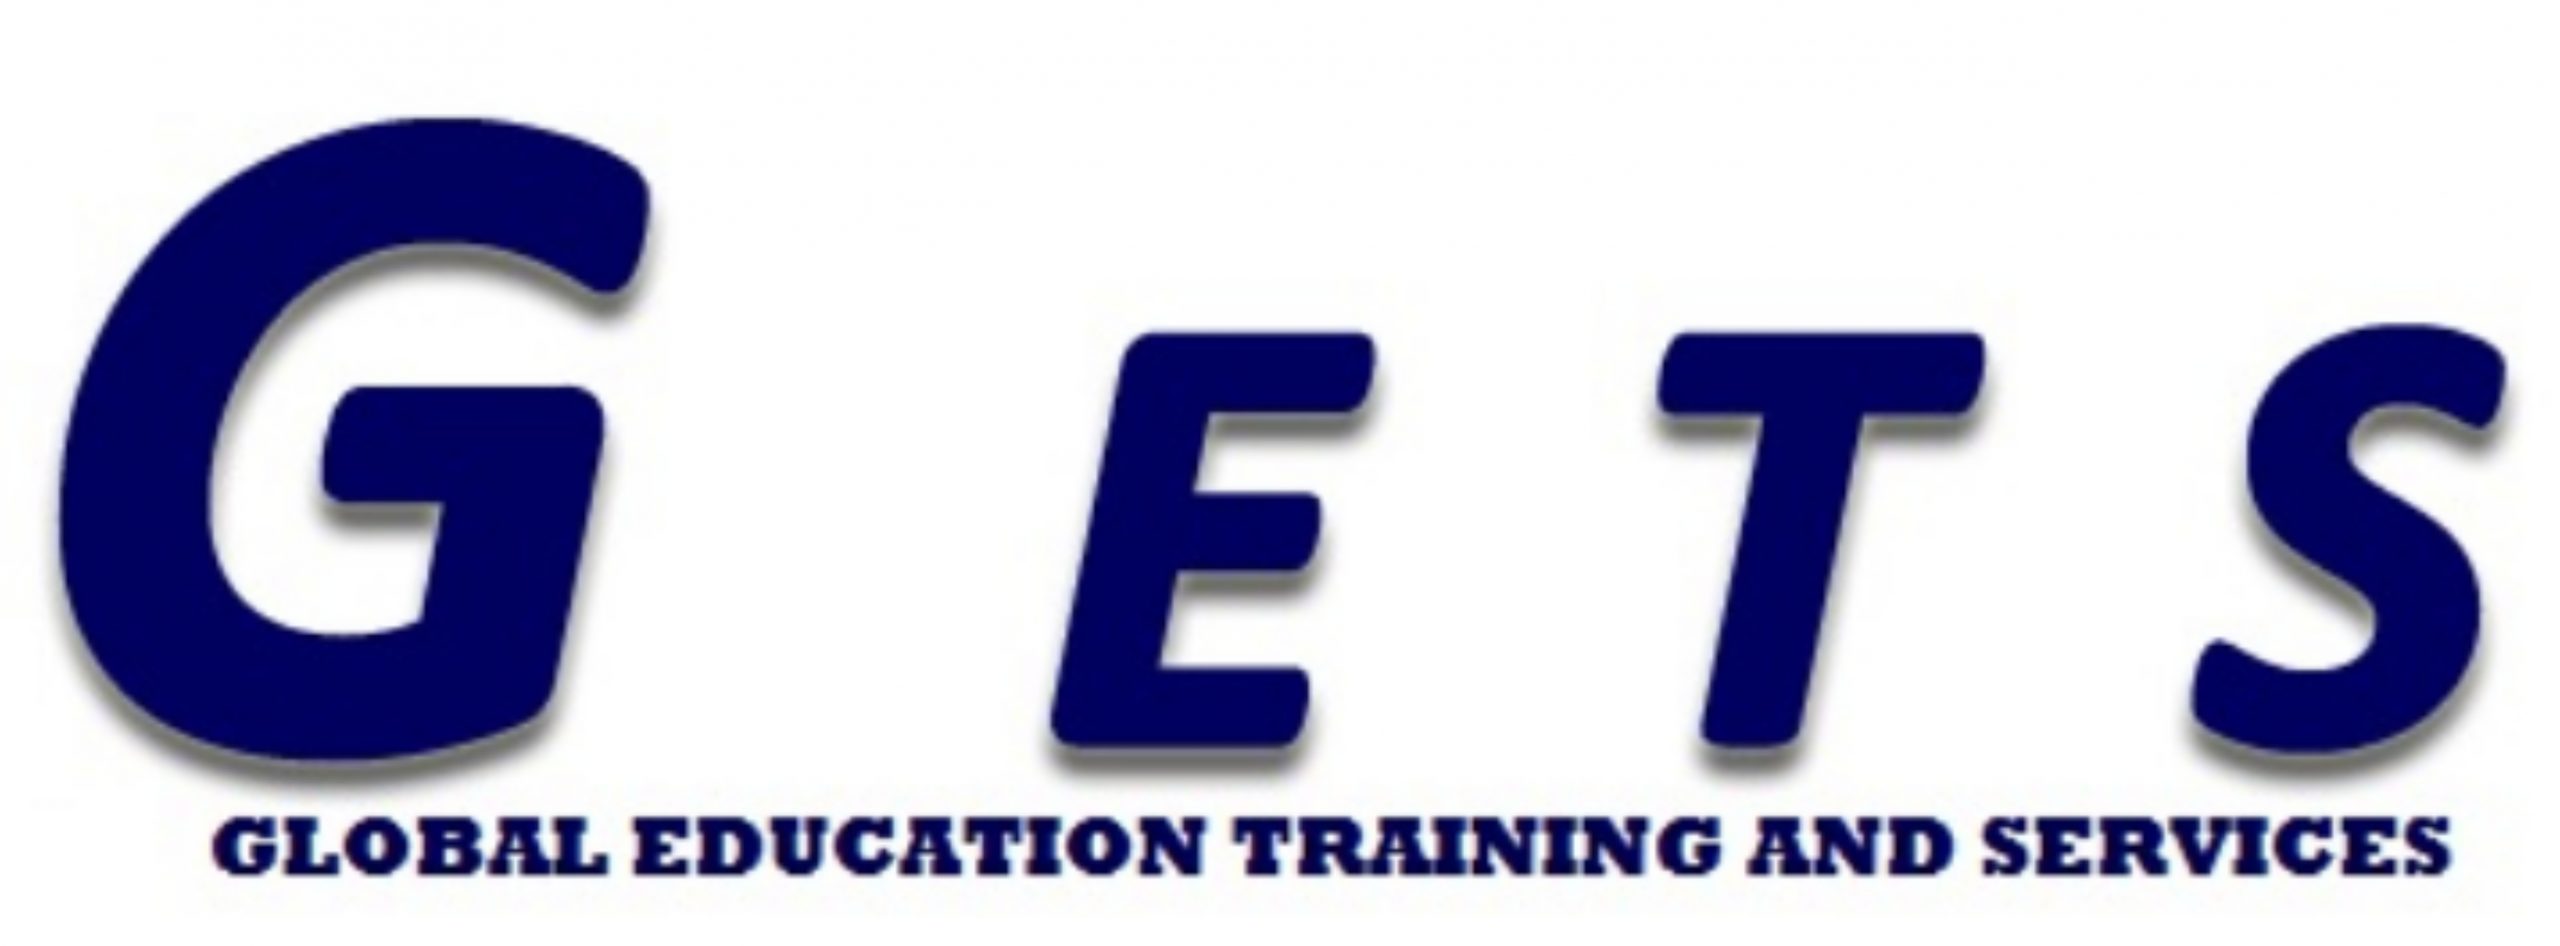 Global Education Training & Services (GETS)